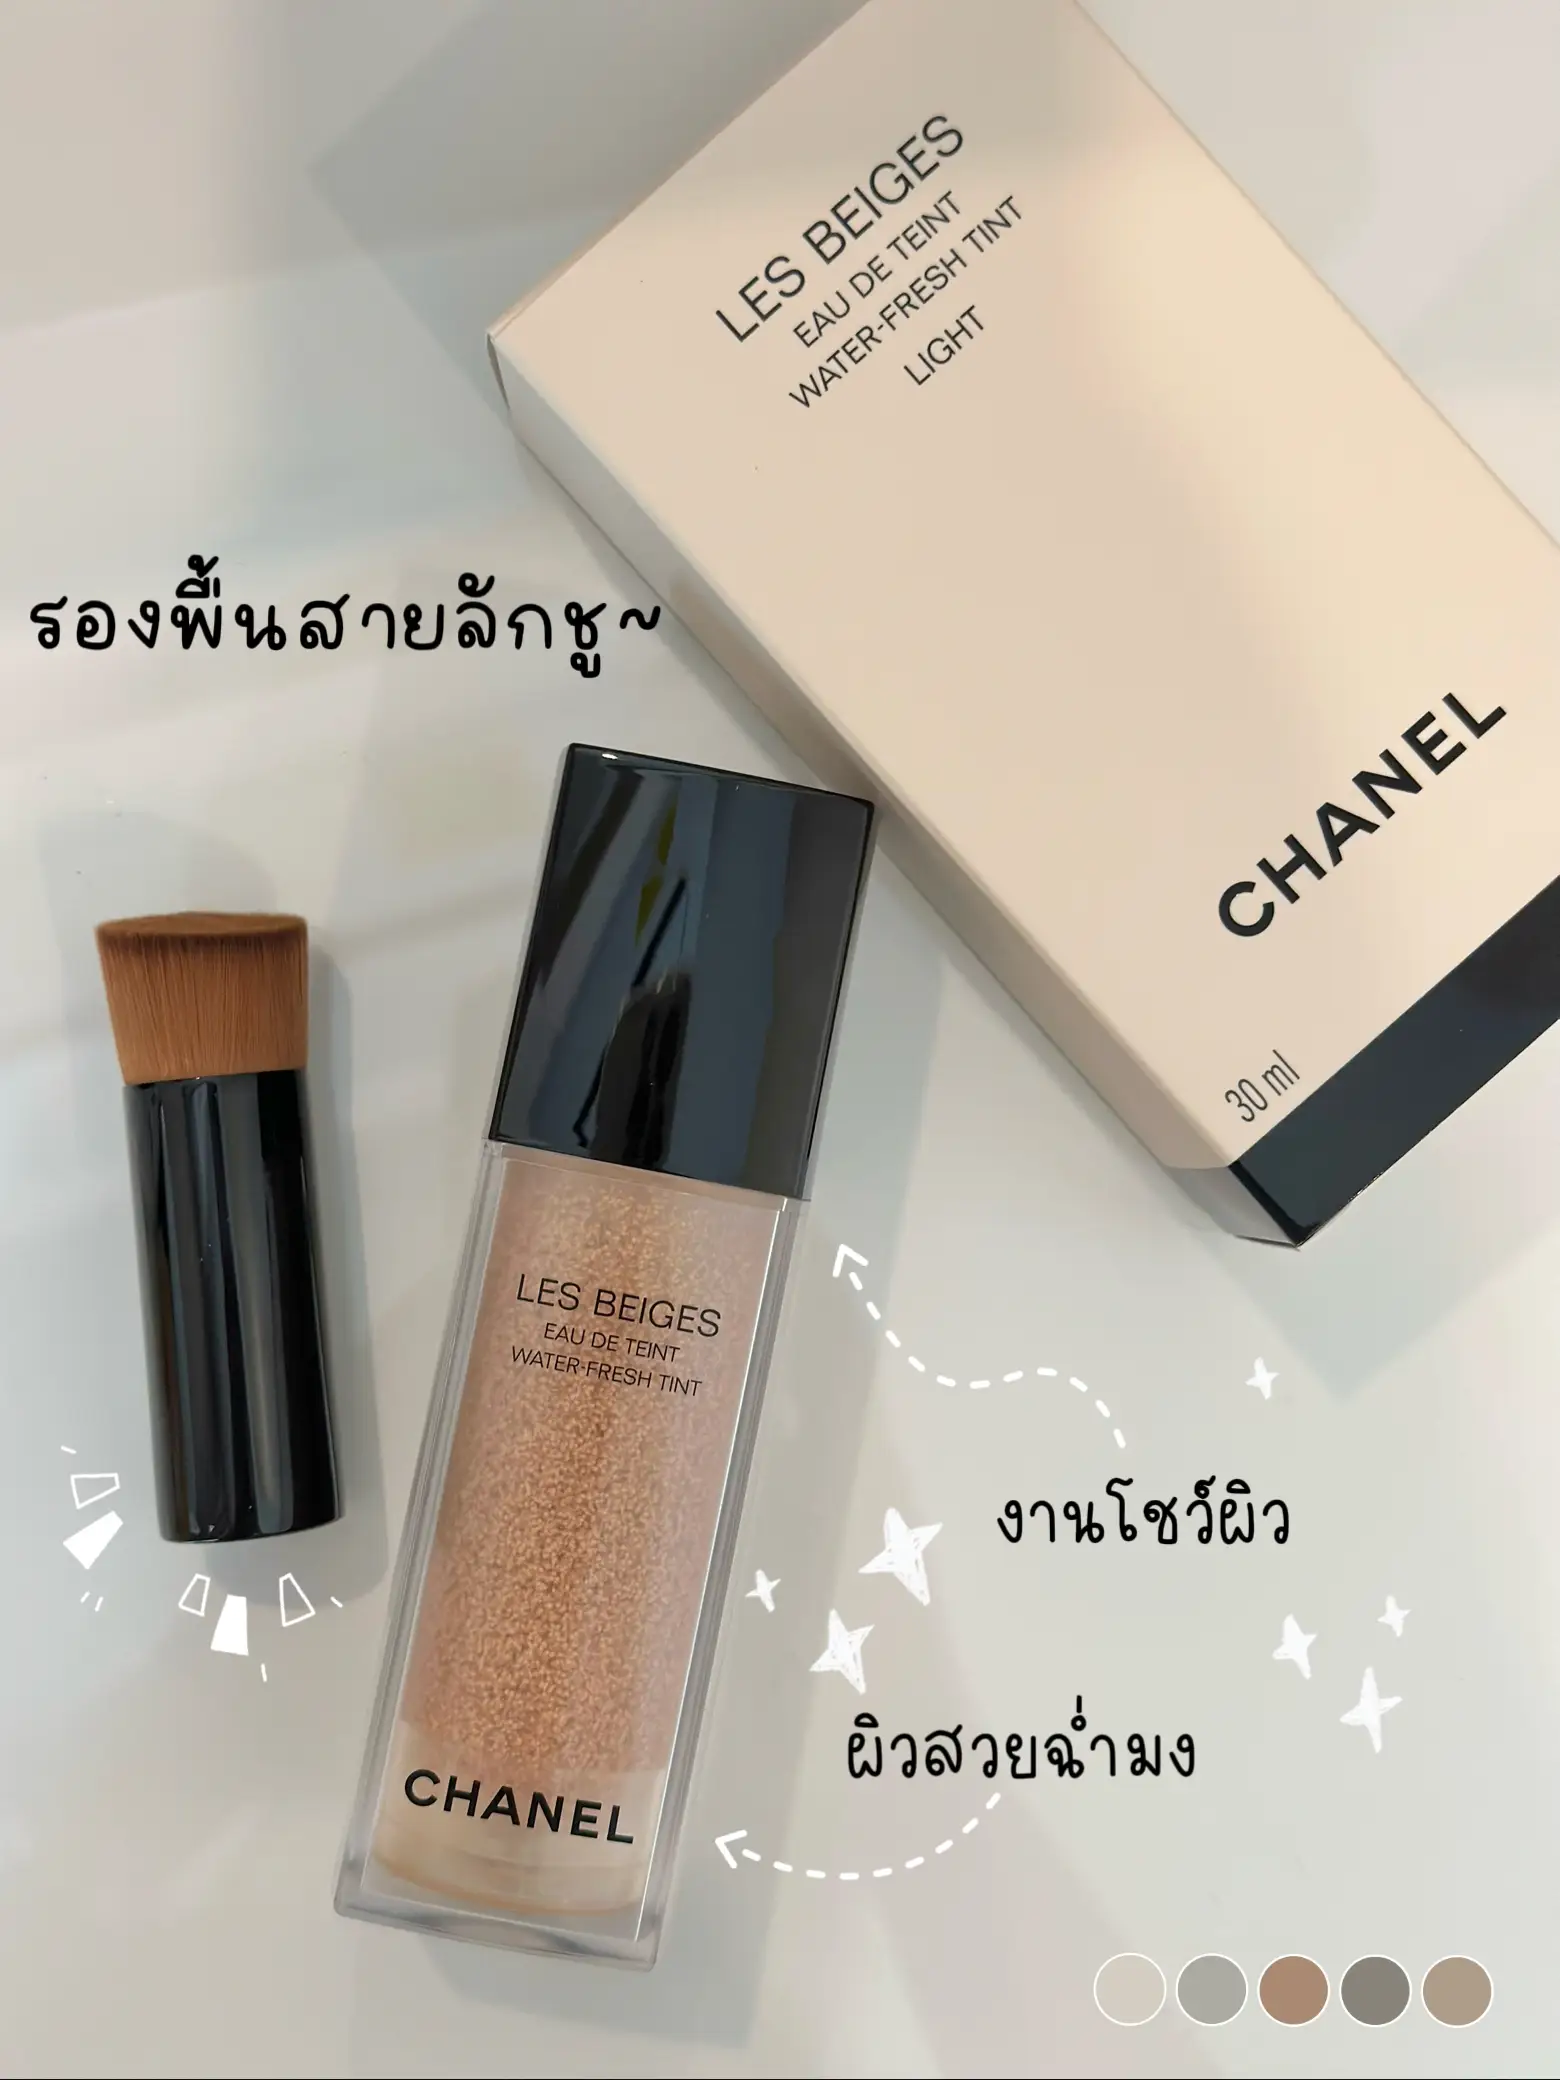 WHAT CHANEL FOUNDATION IS THE BEST? 